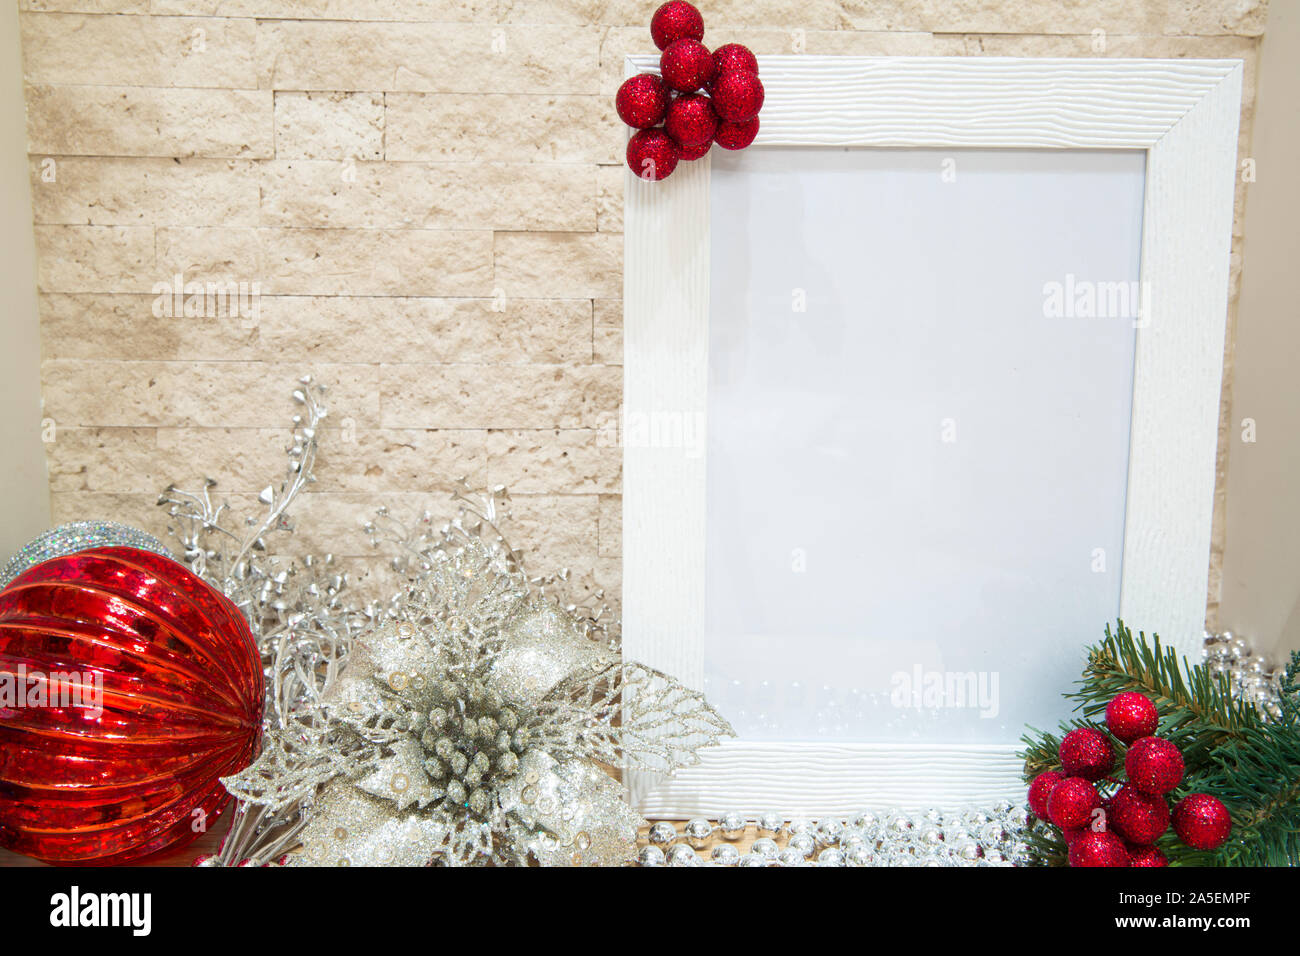 Red berries with fir tree branches, silver and red Christms decoration. Mock up, free space for text. Beautiful white frame. Stock Photo